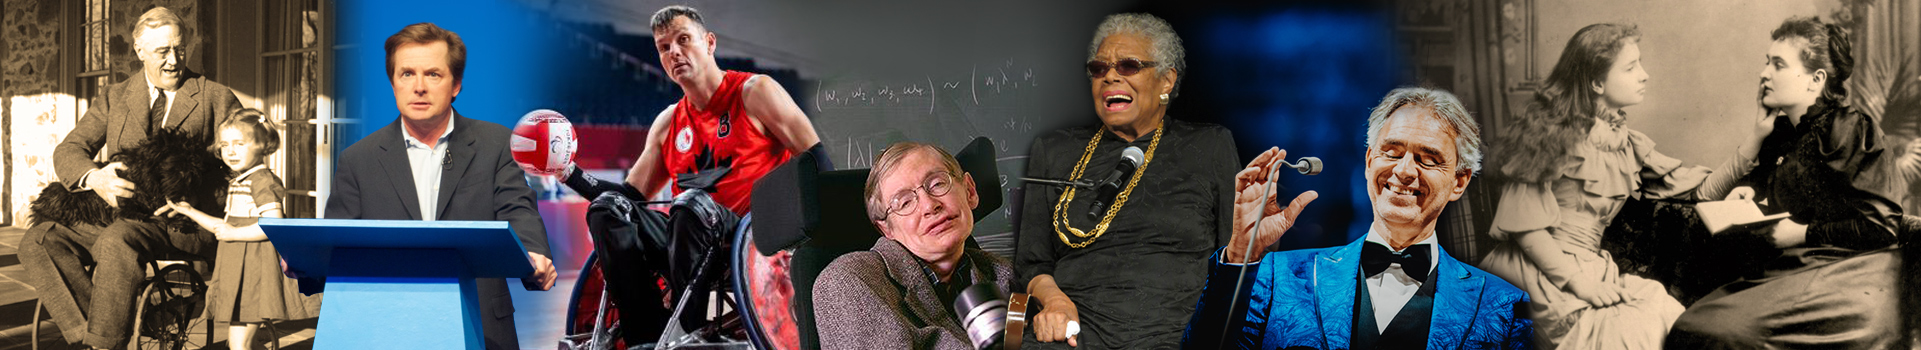 A collage from left to right: President Franklin D. Roosevelt sitting in his wheelchair holding a black dog and a young girl standing beside him petting the dog. Michael J. Fox standing behind a podium. Michael Whitehead in his Wheelchair Rugby Team Canada uniform holding a rugby ball in his right hand. Stephen Hawking in his wheelchair in front notes on a blackboard, Maya Angelou standing with a cane behind a microphone. Andrea Bocelli reaching for a microphone. Helen Keller touching the lips of Anne Sullivan as she speaks to her.